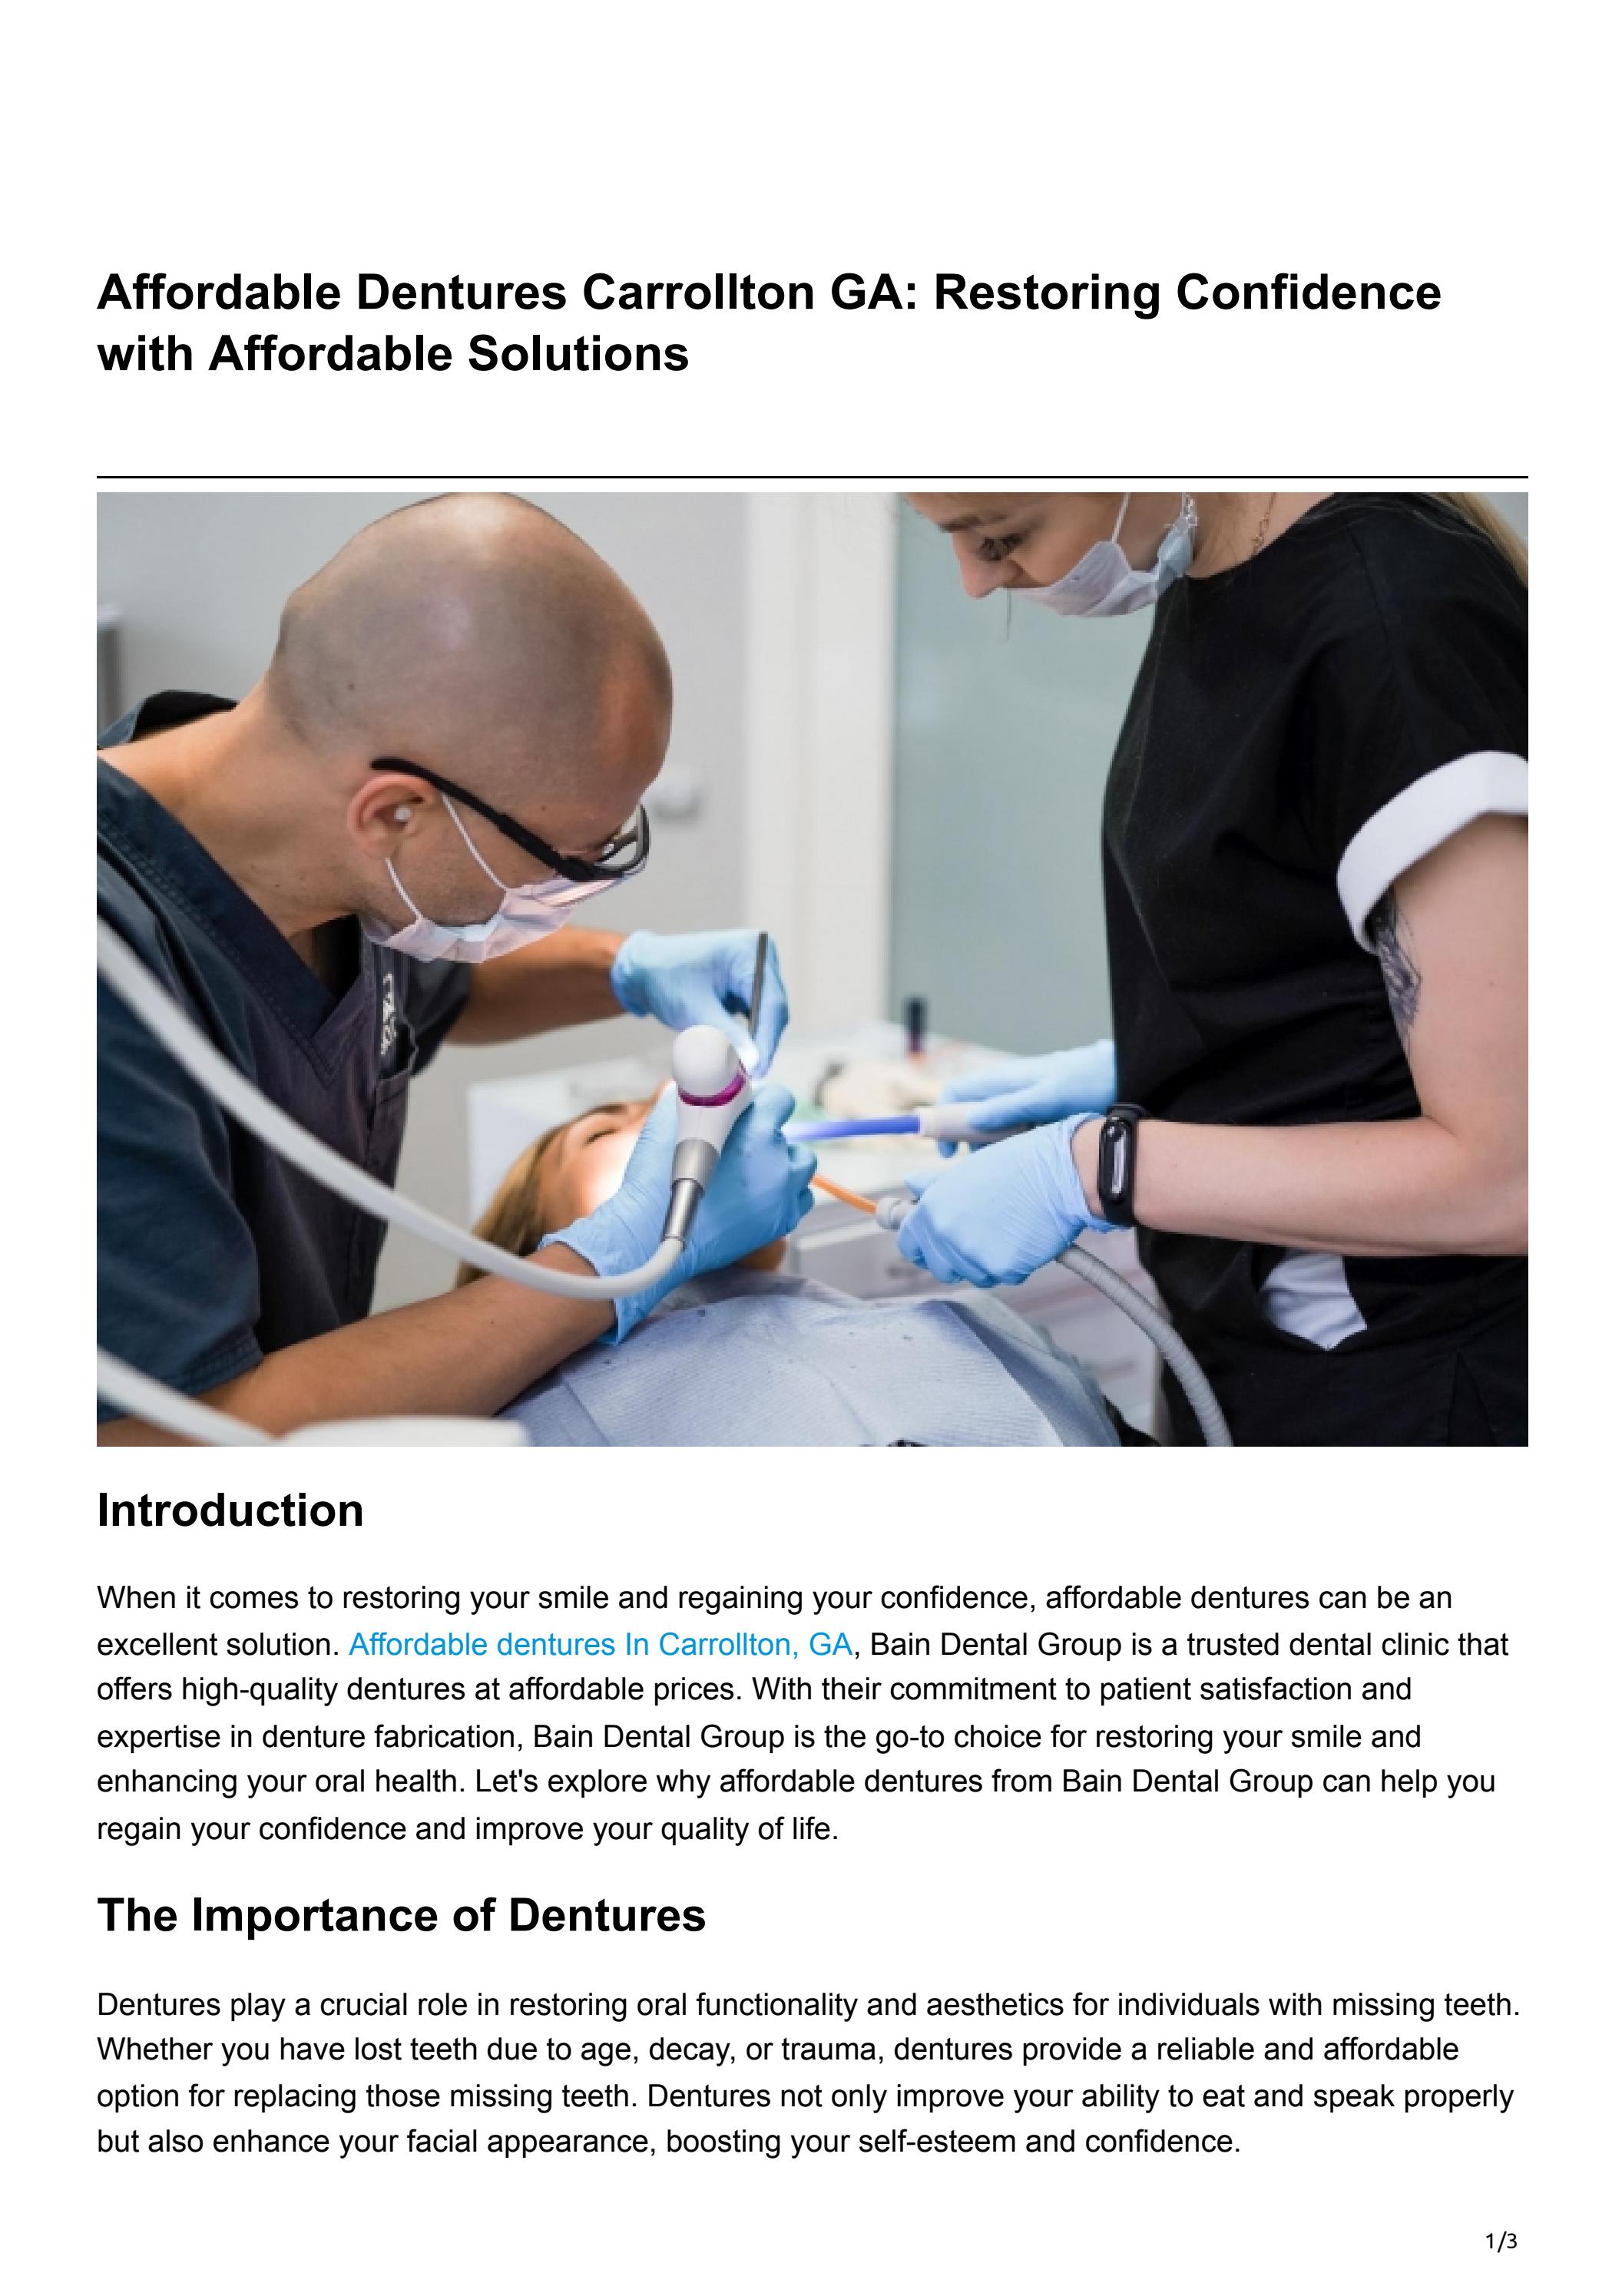 Affordable Dentures: Restoring Function and Confidence